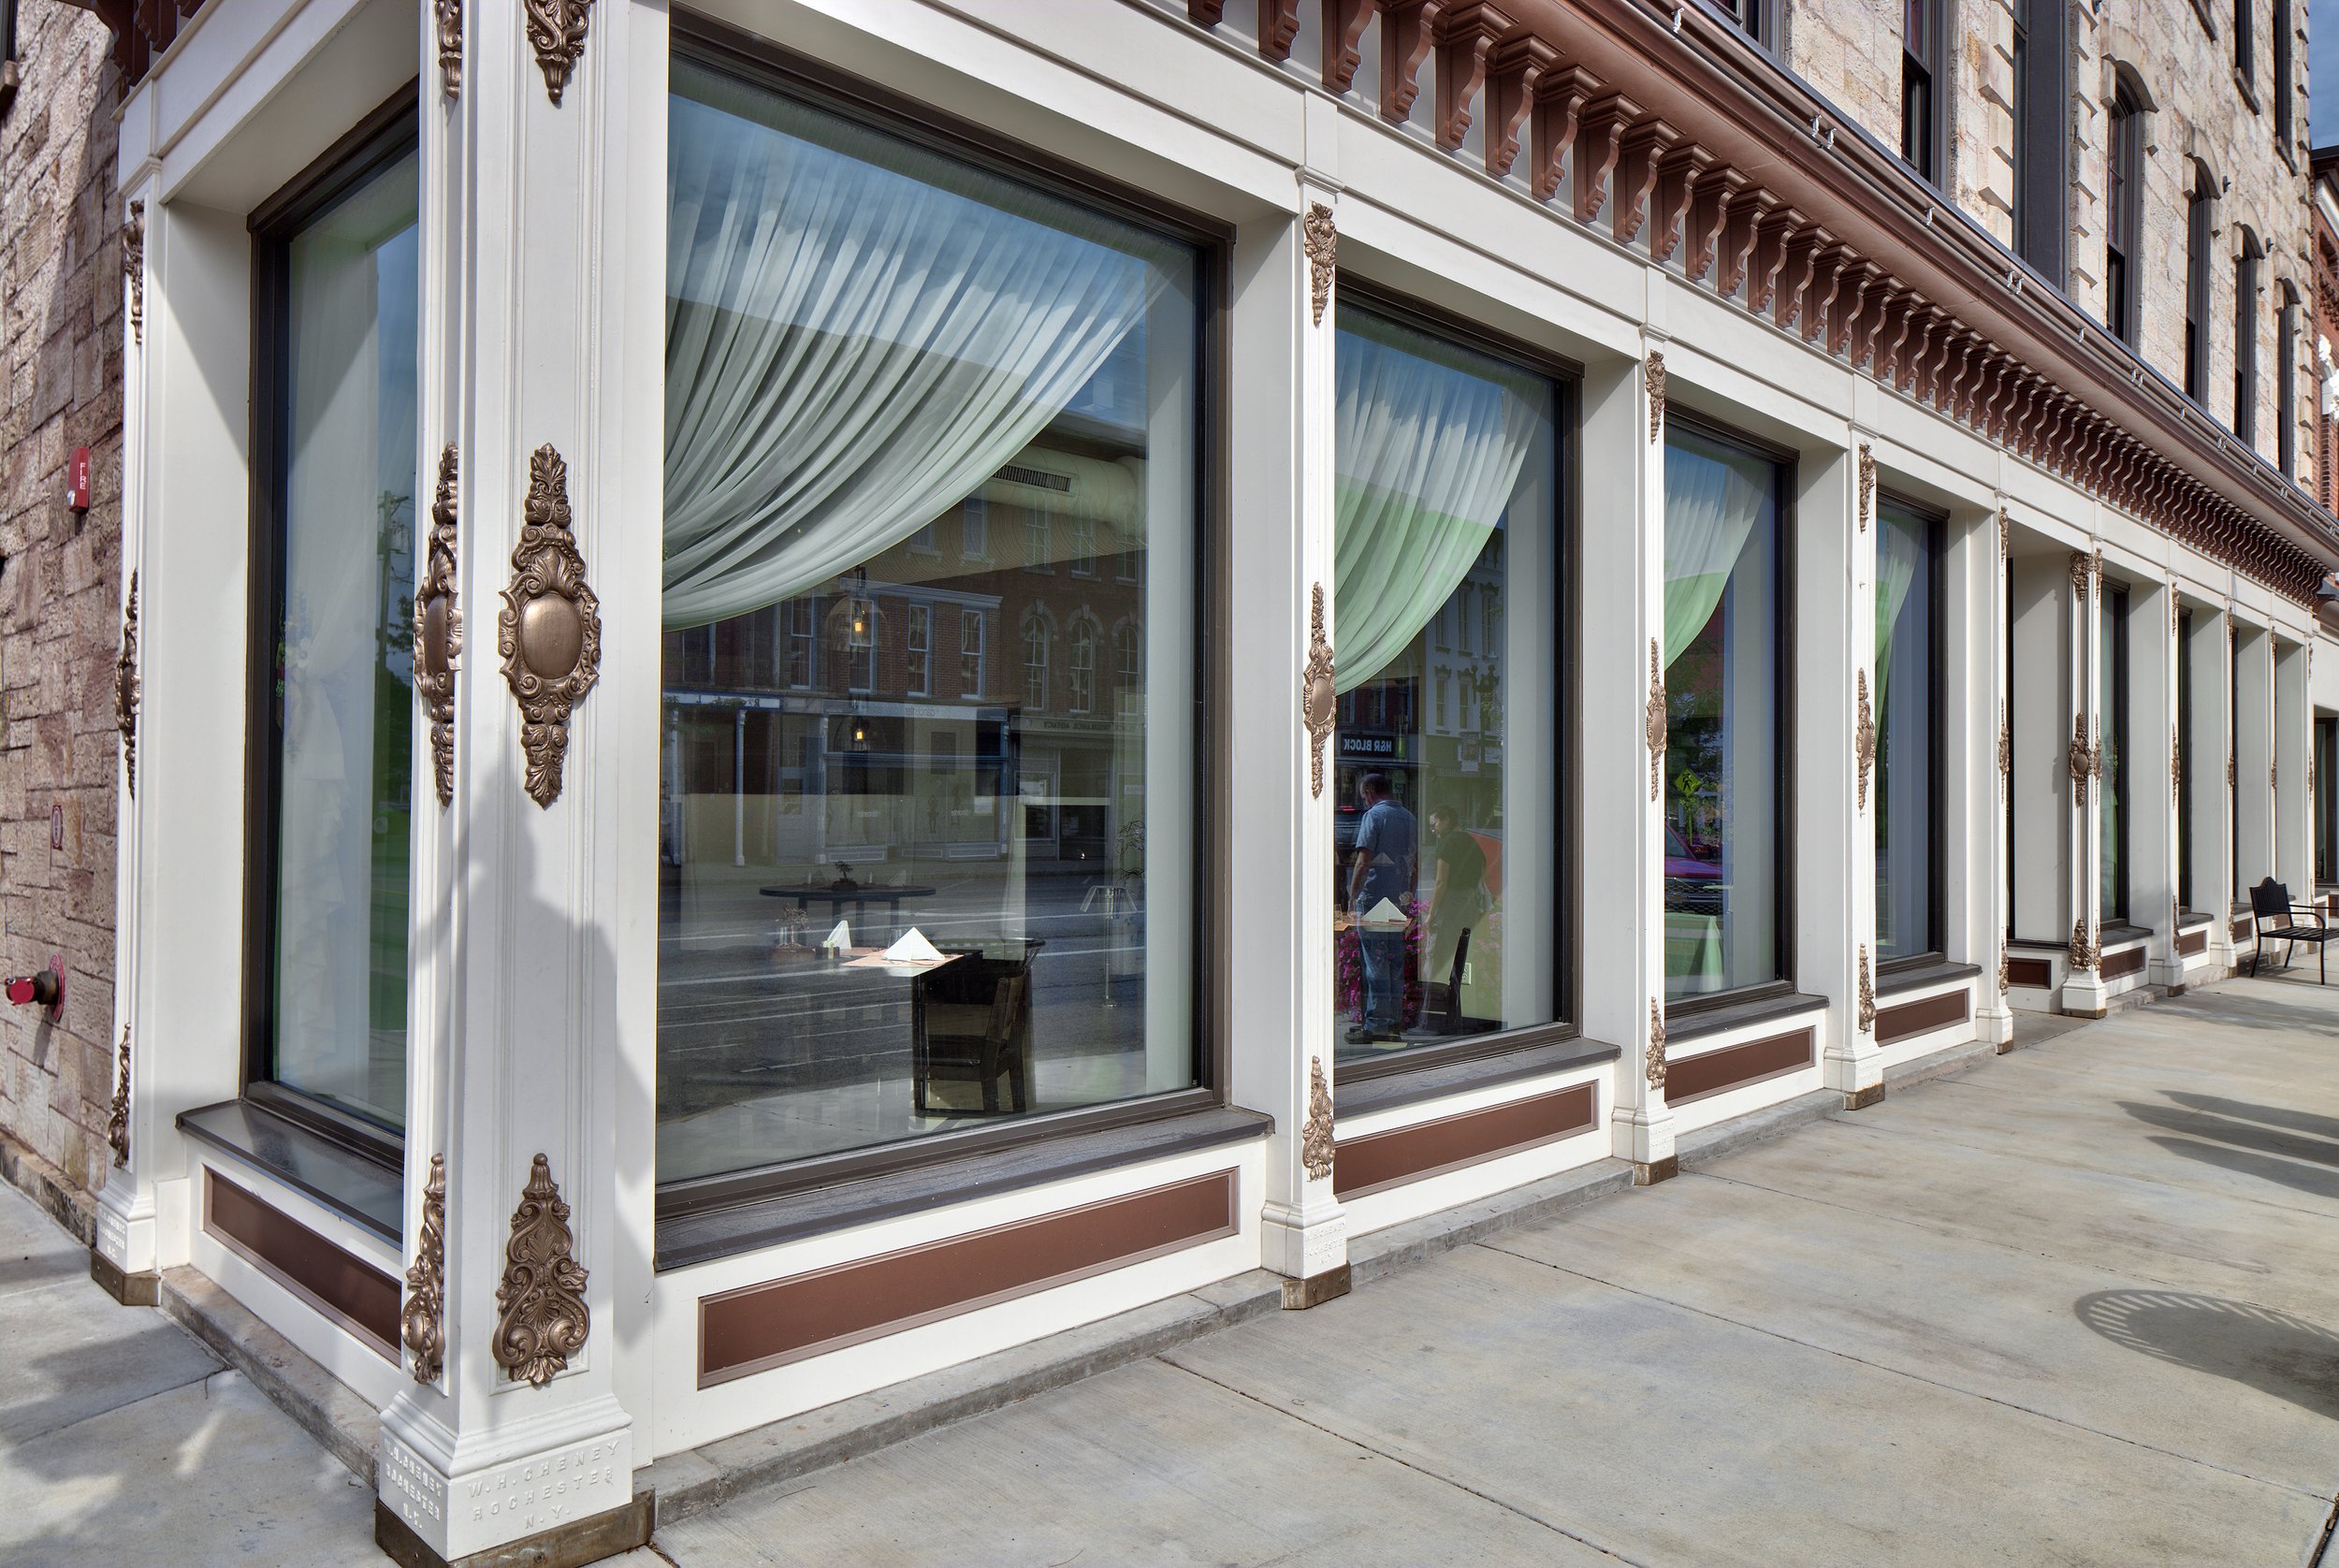 The restored storefront windows seen from outside. Photo by Gene Avallone